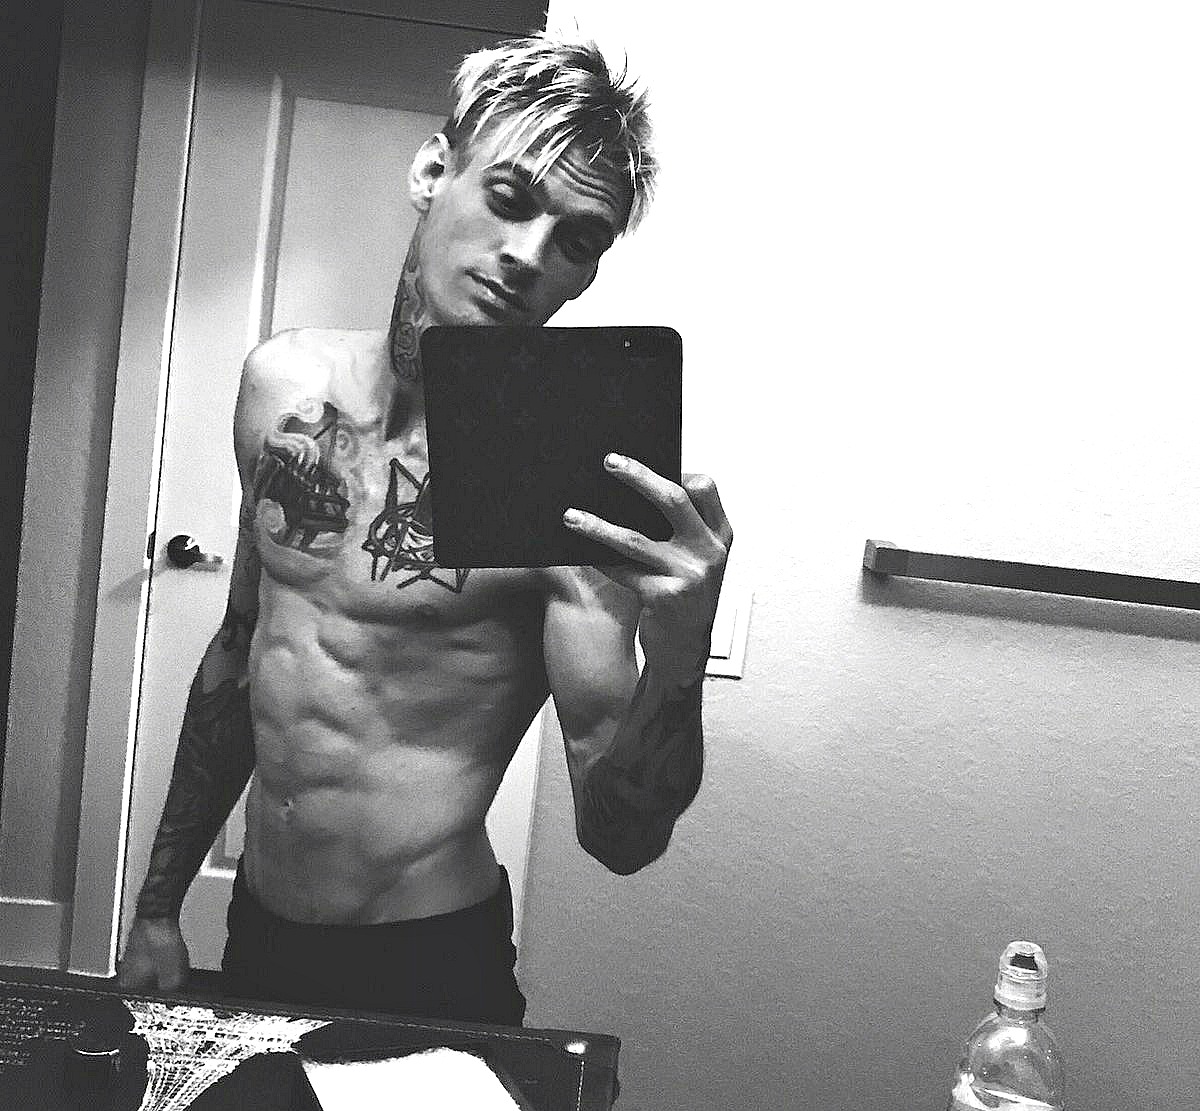 Who was the man that Aaron Carter had a sexual relationship with when he was 17?